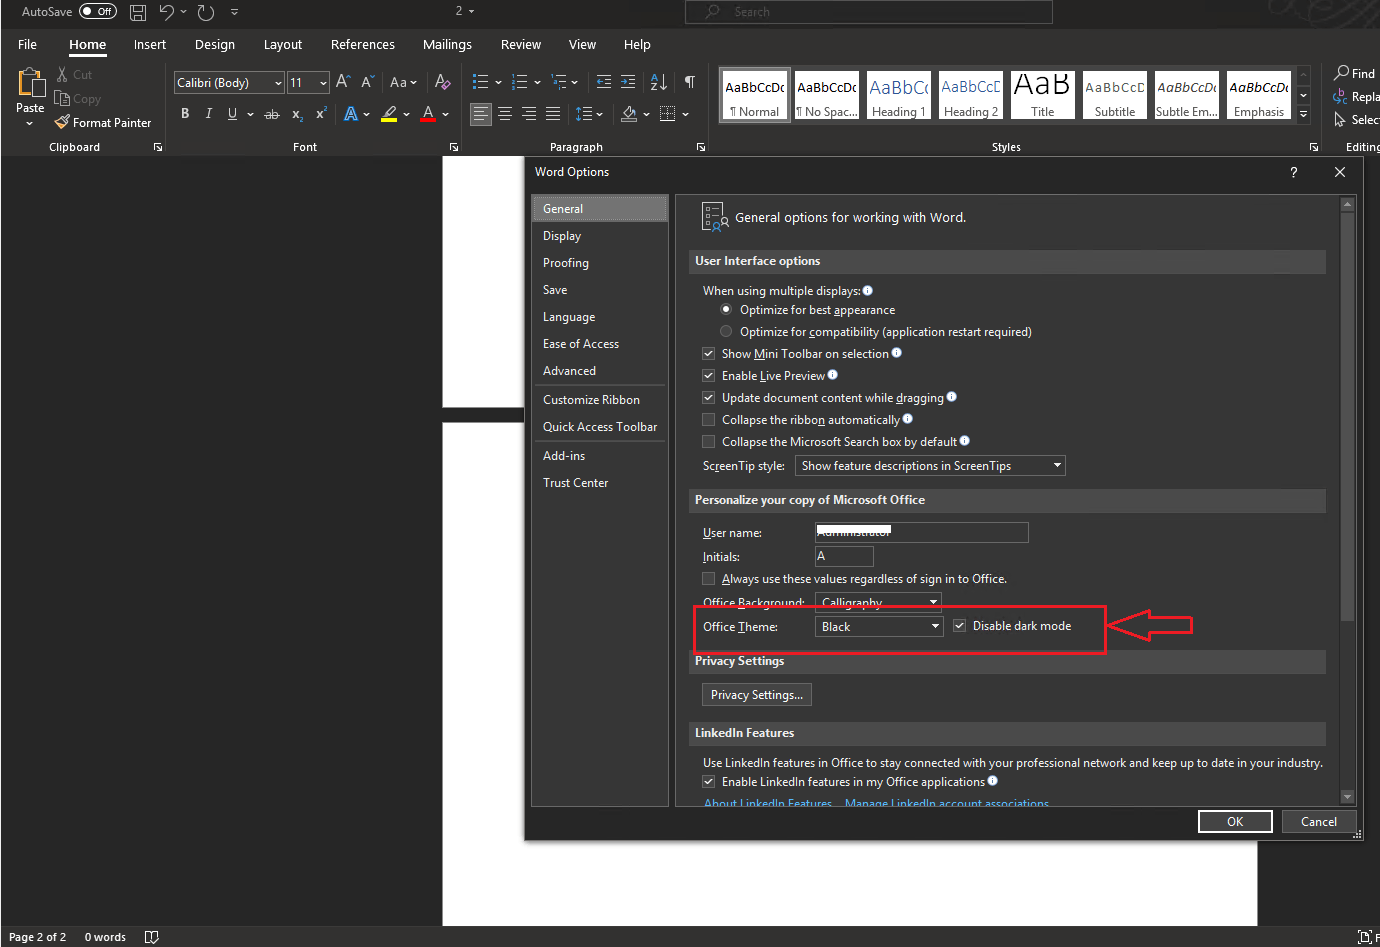 Colors going inverted for some reason? - Microsoft Community